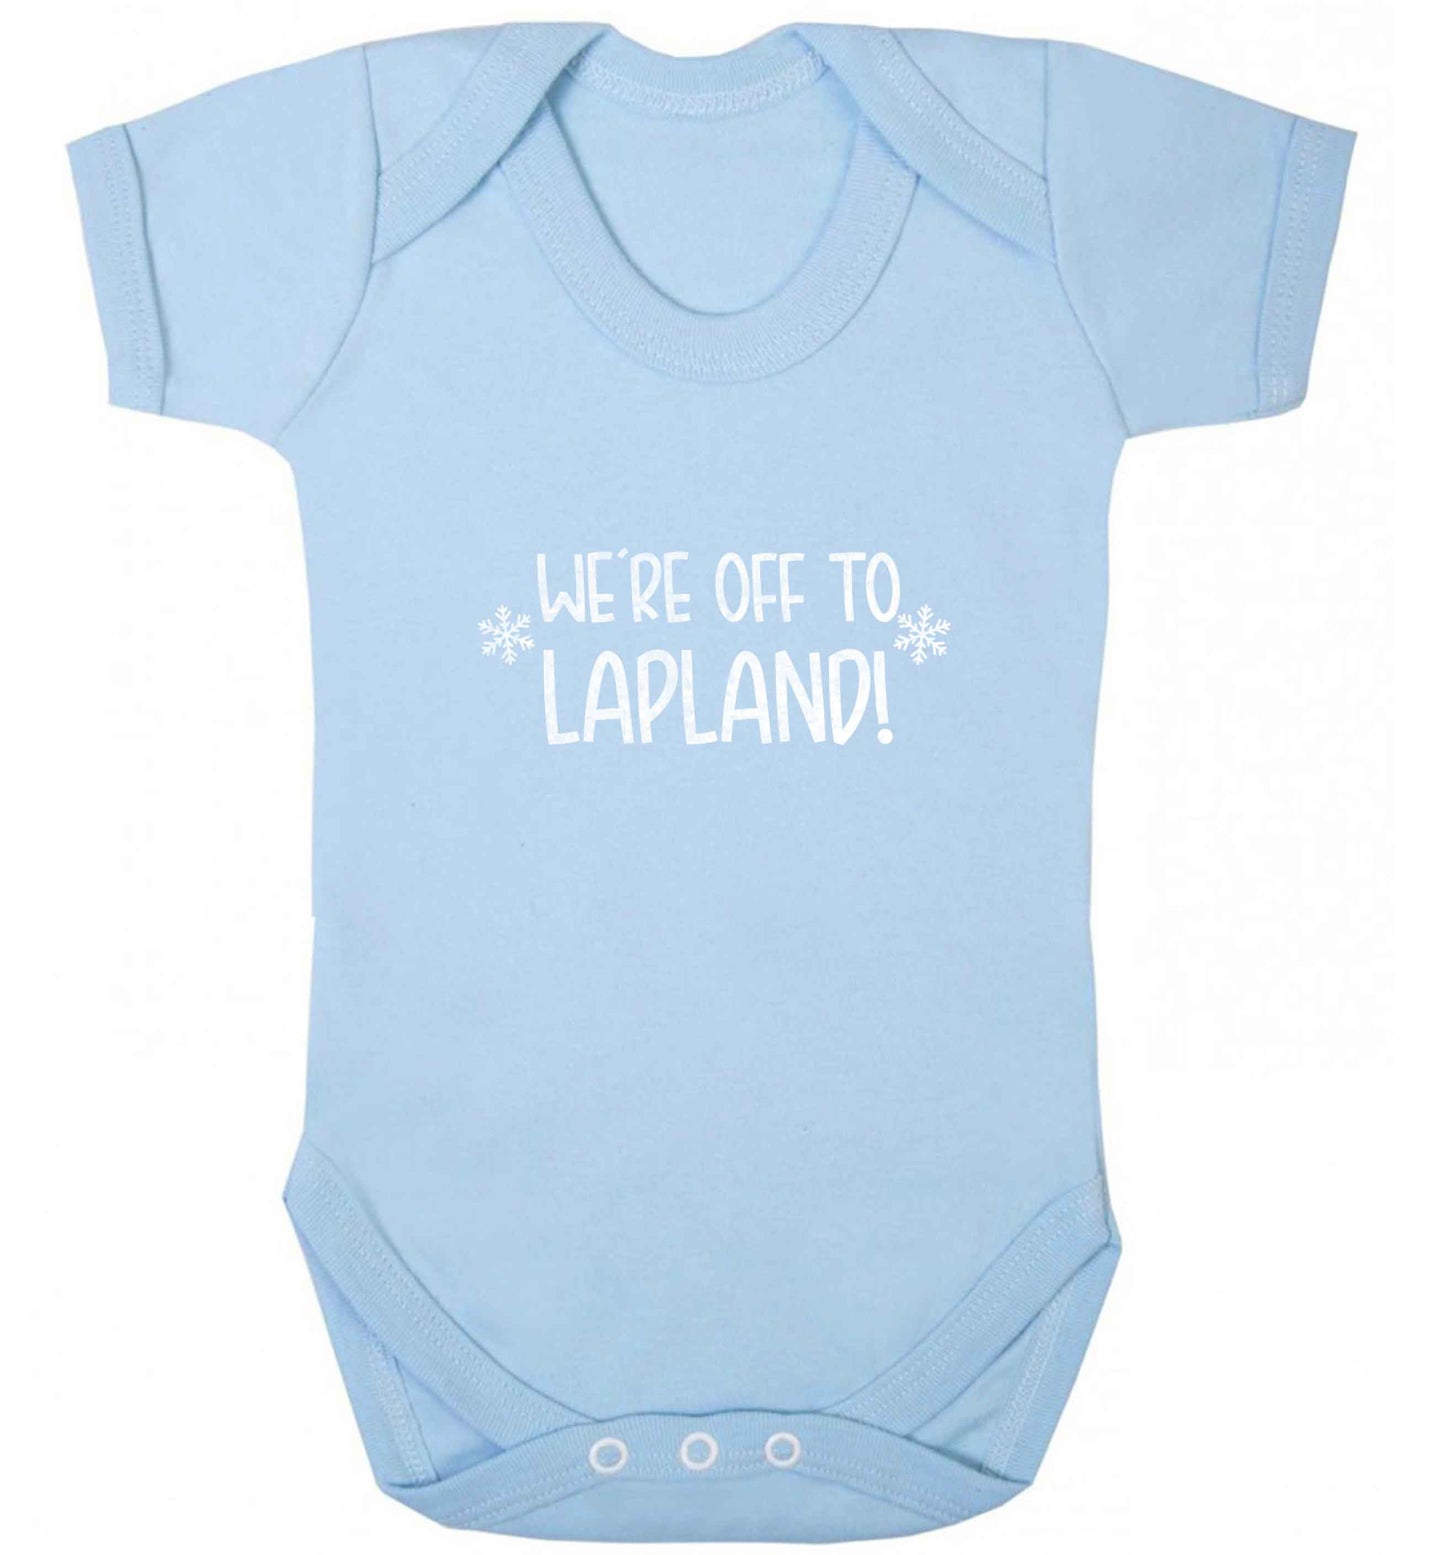 We're off to Lapland baby vest pale blue 18-24 months